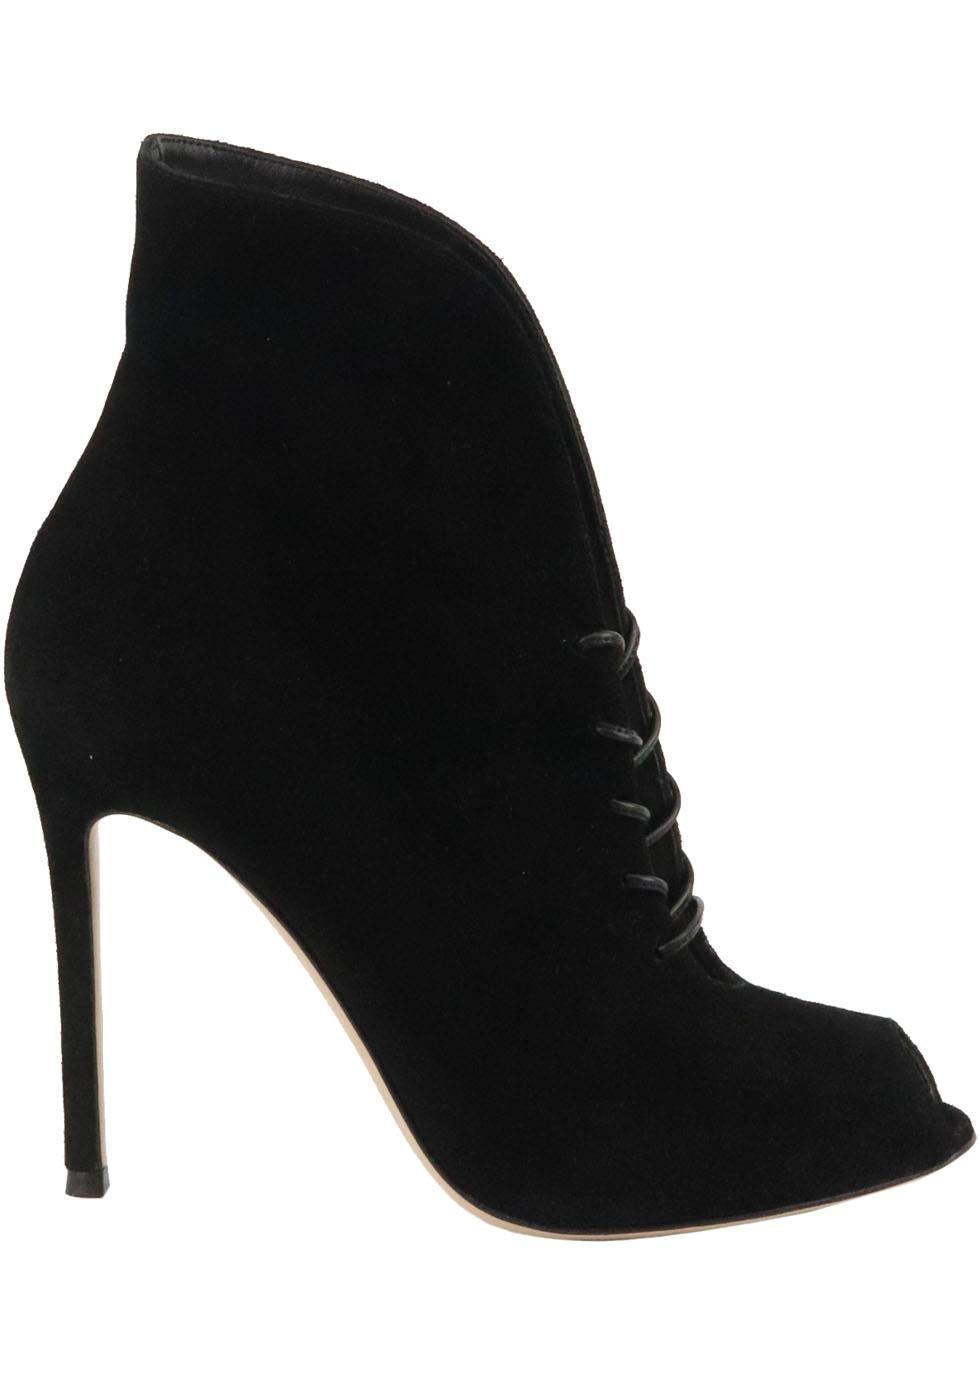 GIANVITO ROSSI LACE UP SUEDE ANKLE BOOTS EU 38 UK 5 US 8